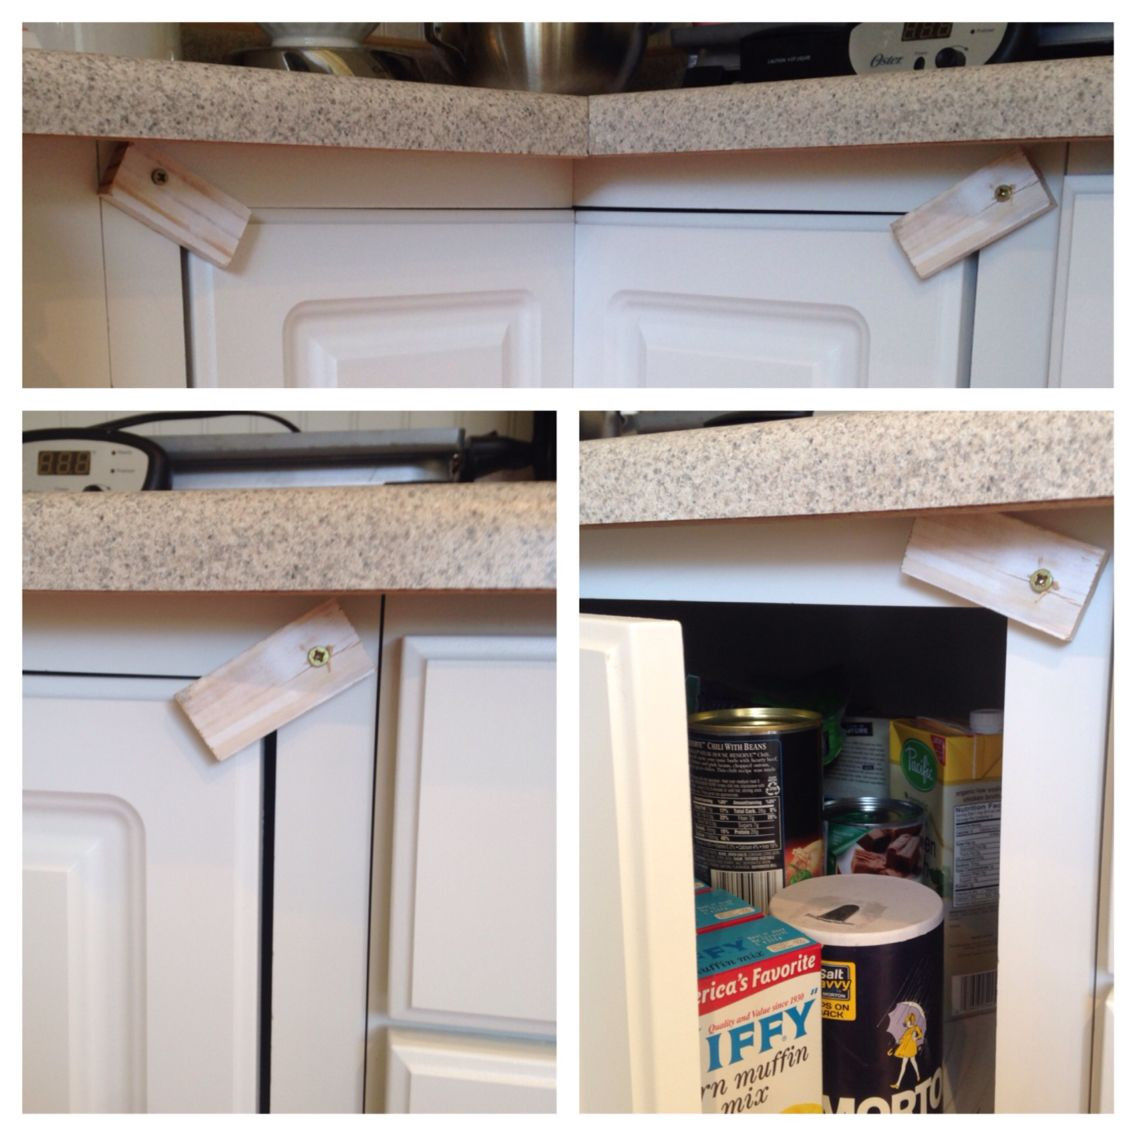 Diy Child Proof Cabinets
 DIY Lazy Susan Child Safety Locks This is a basic